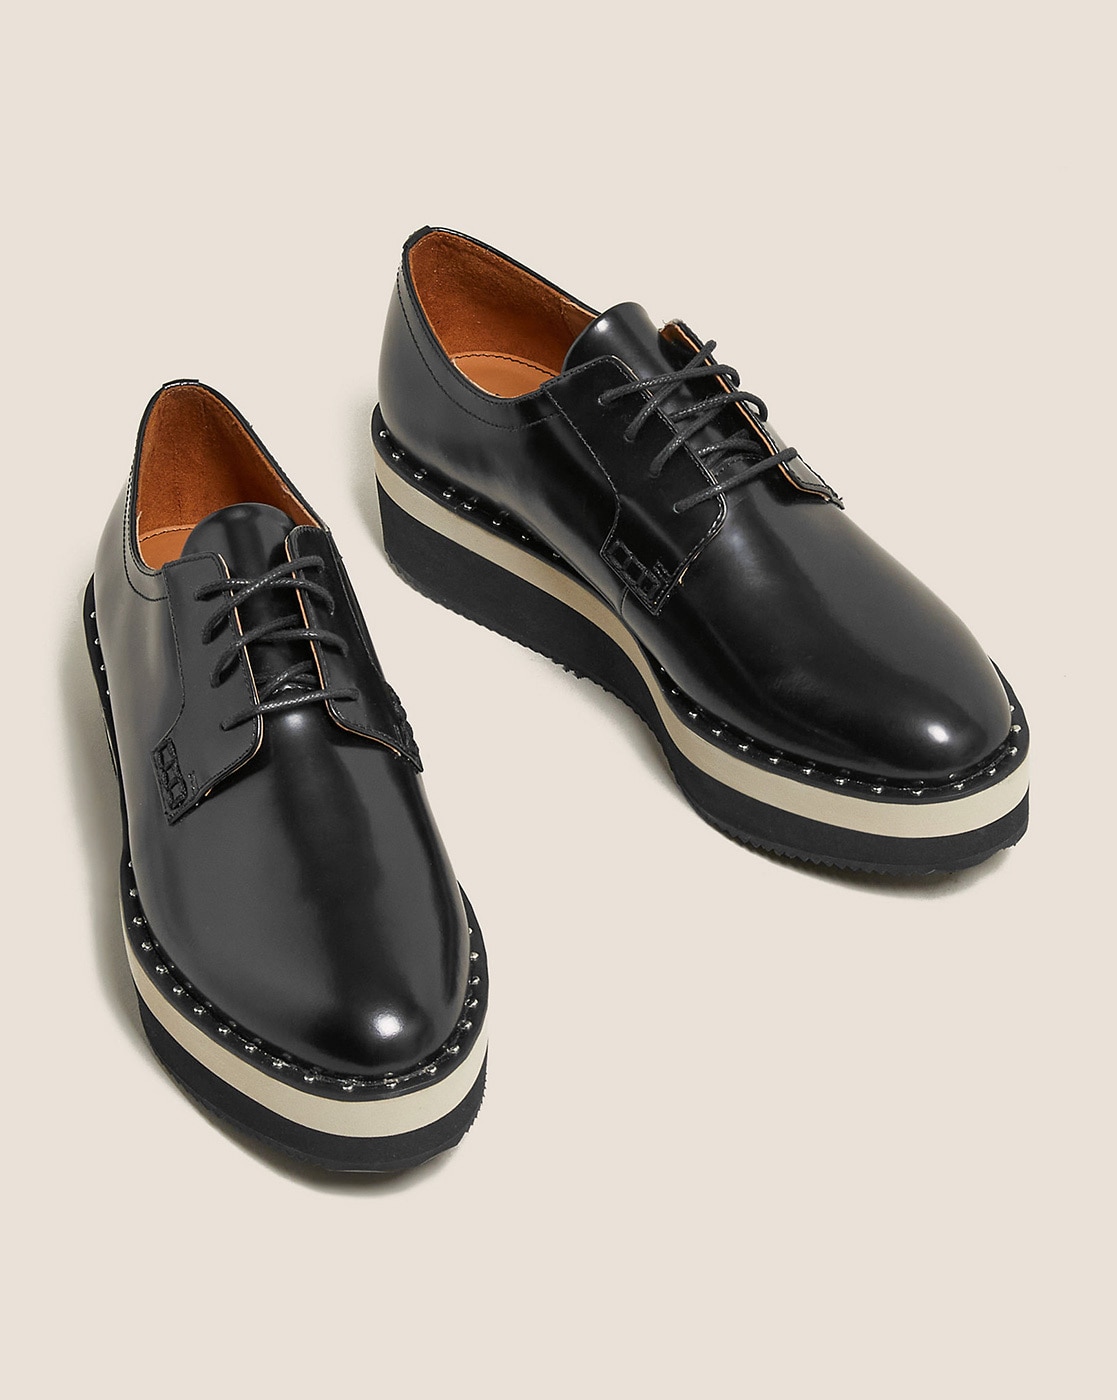 Marks & Spencer Men Shoes Flat Shoes Brogues Leather Brogues 